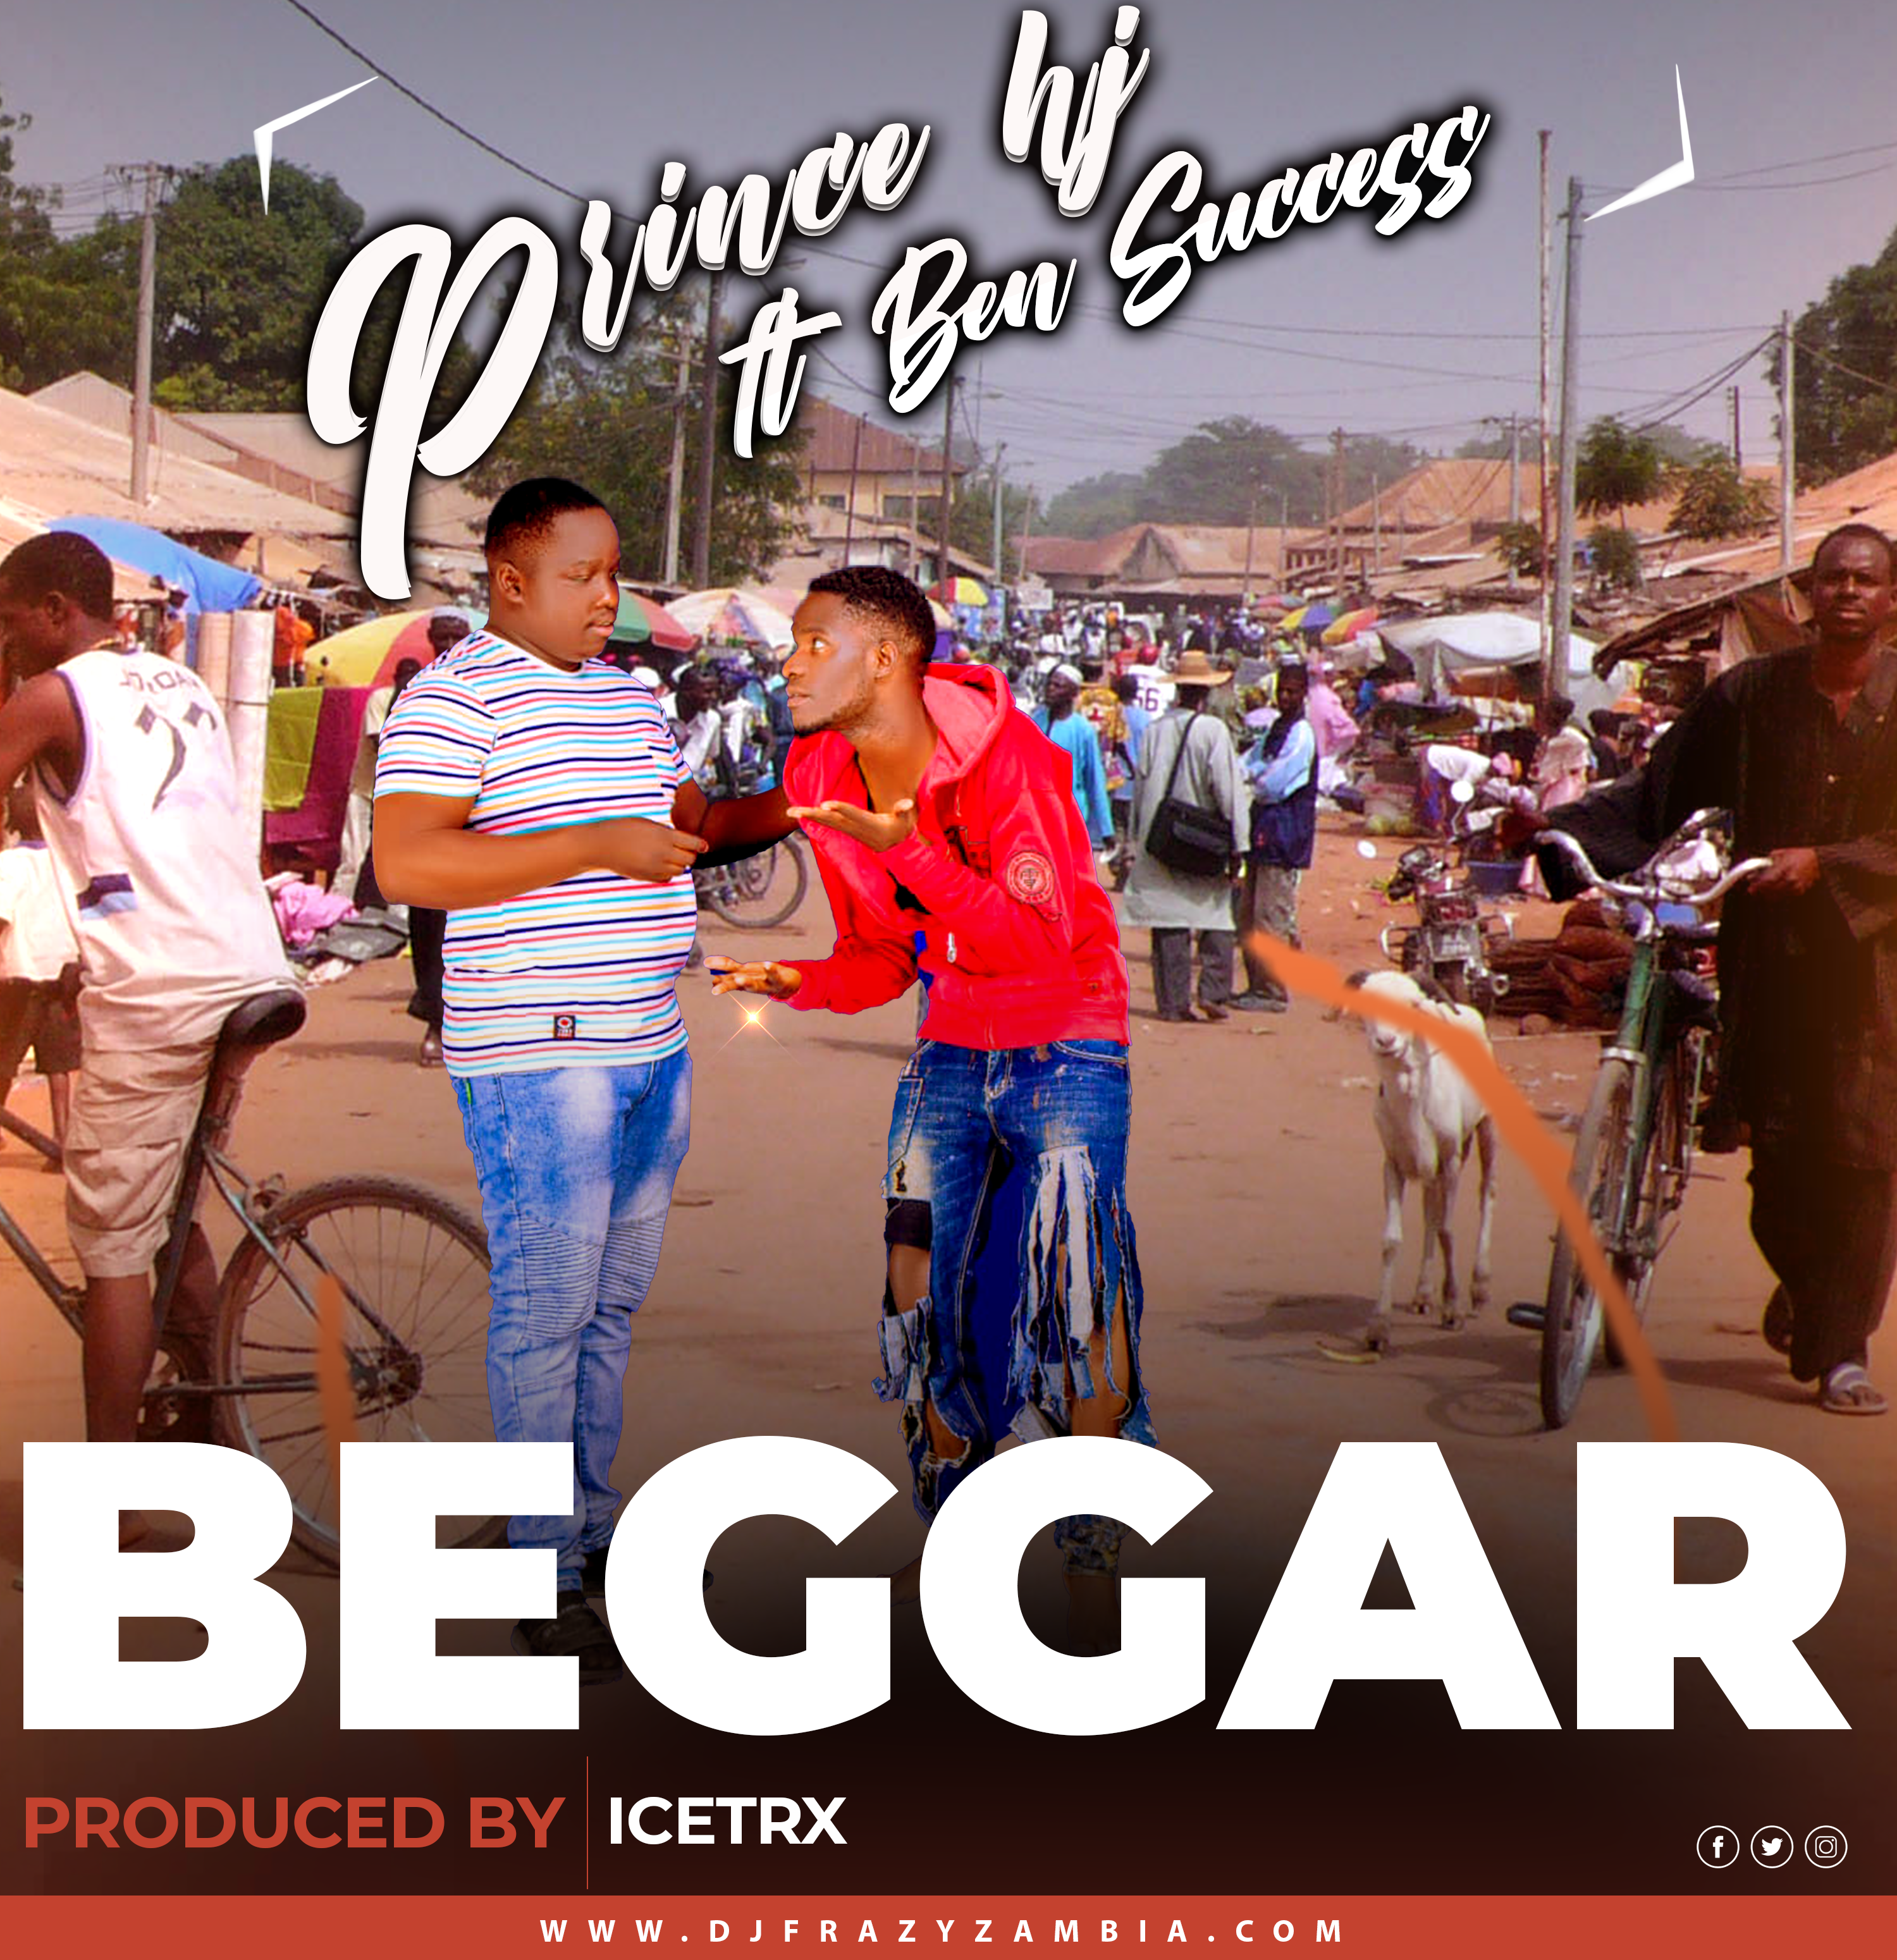 Prince hj Ft Ben Success - Beggar (produced by icetrx)